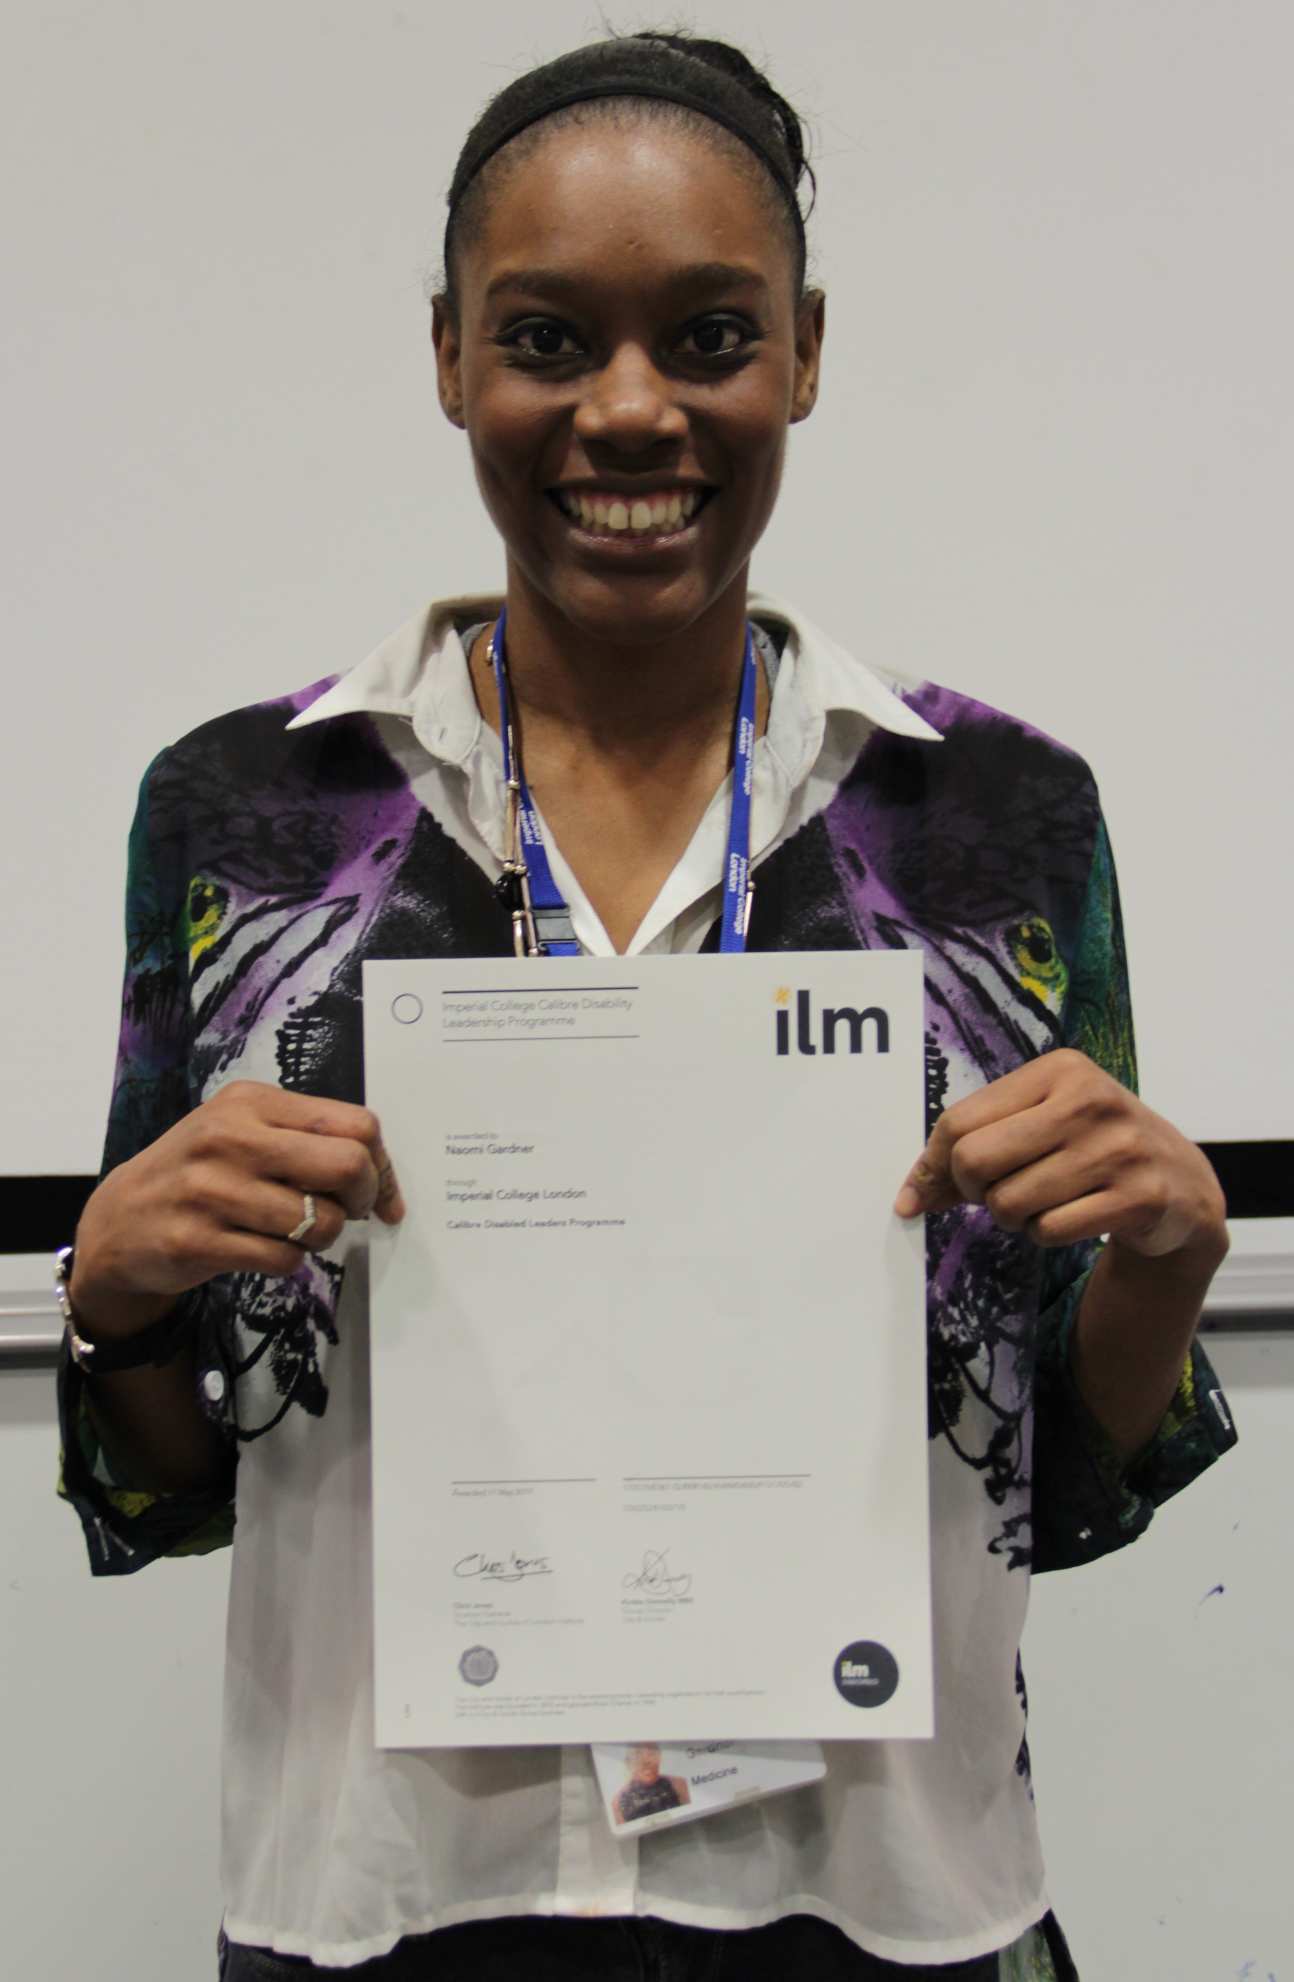 Woman smiles at camera holding certificate